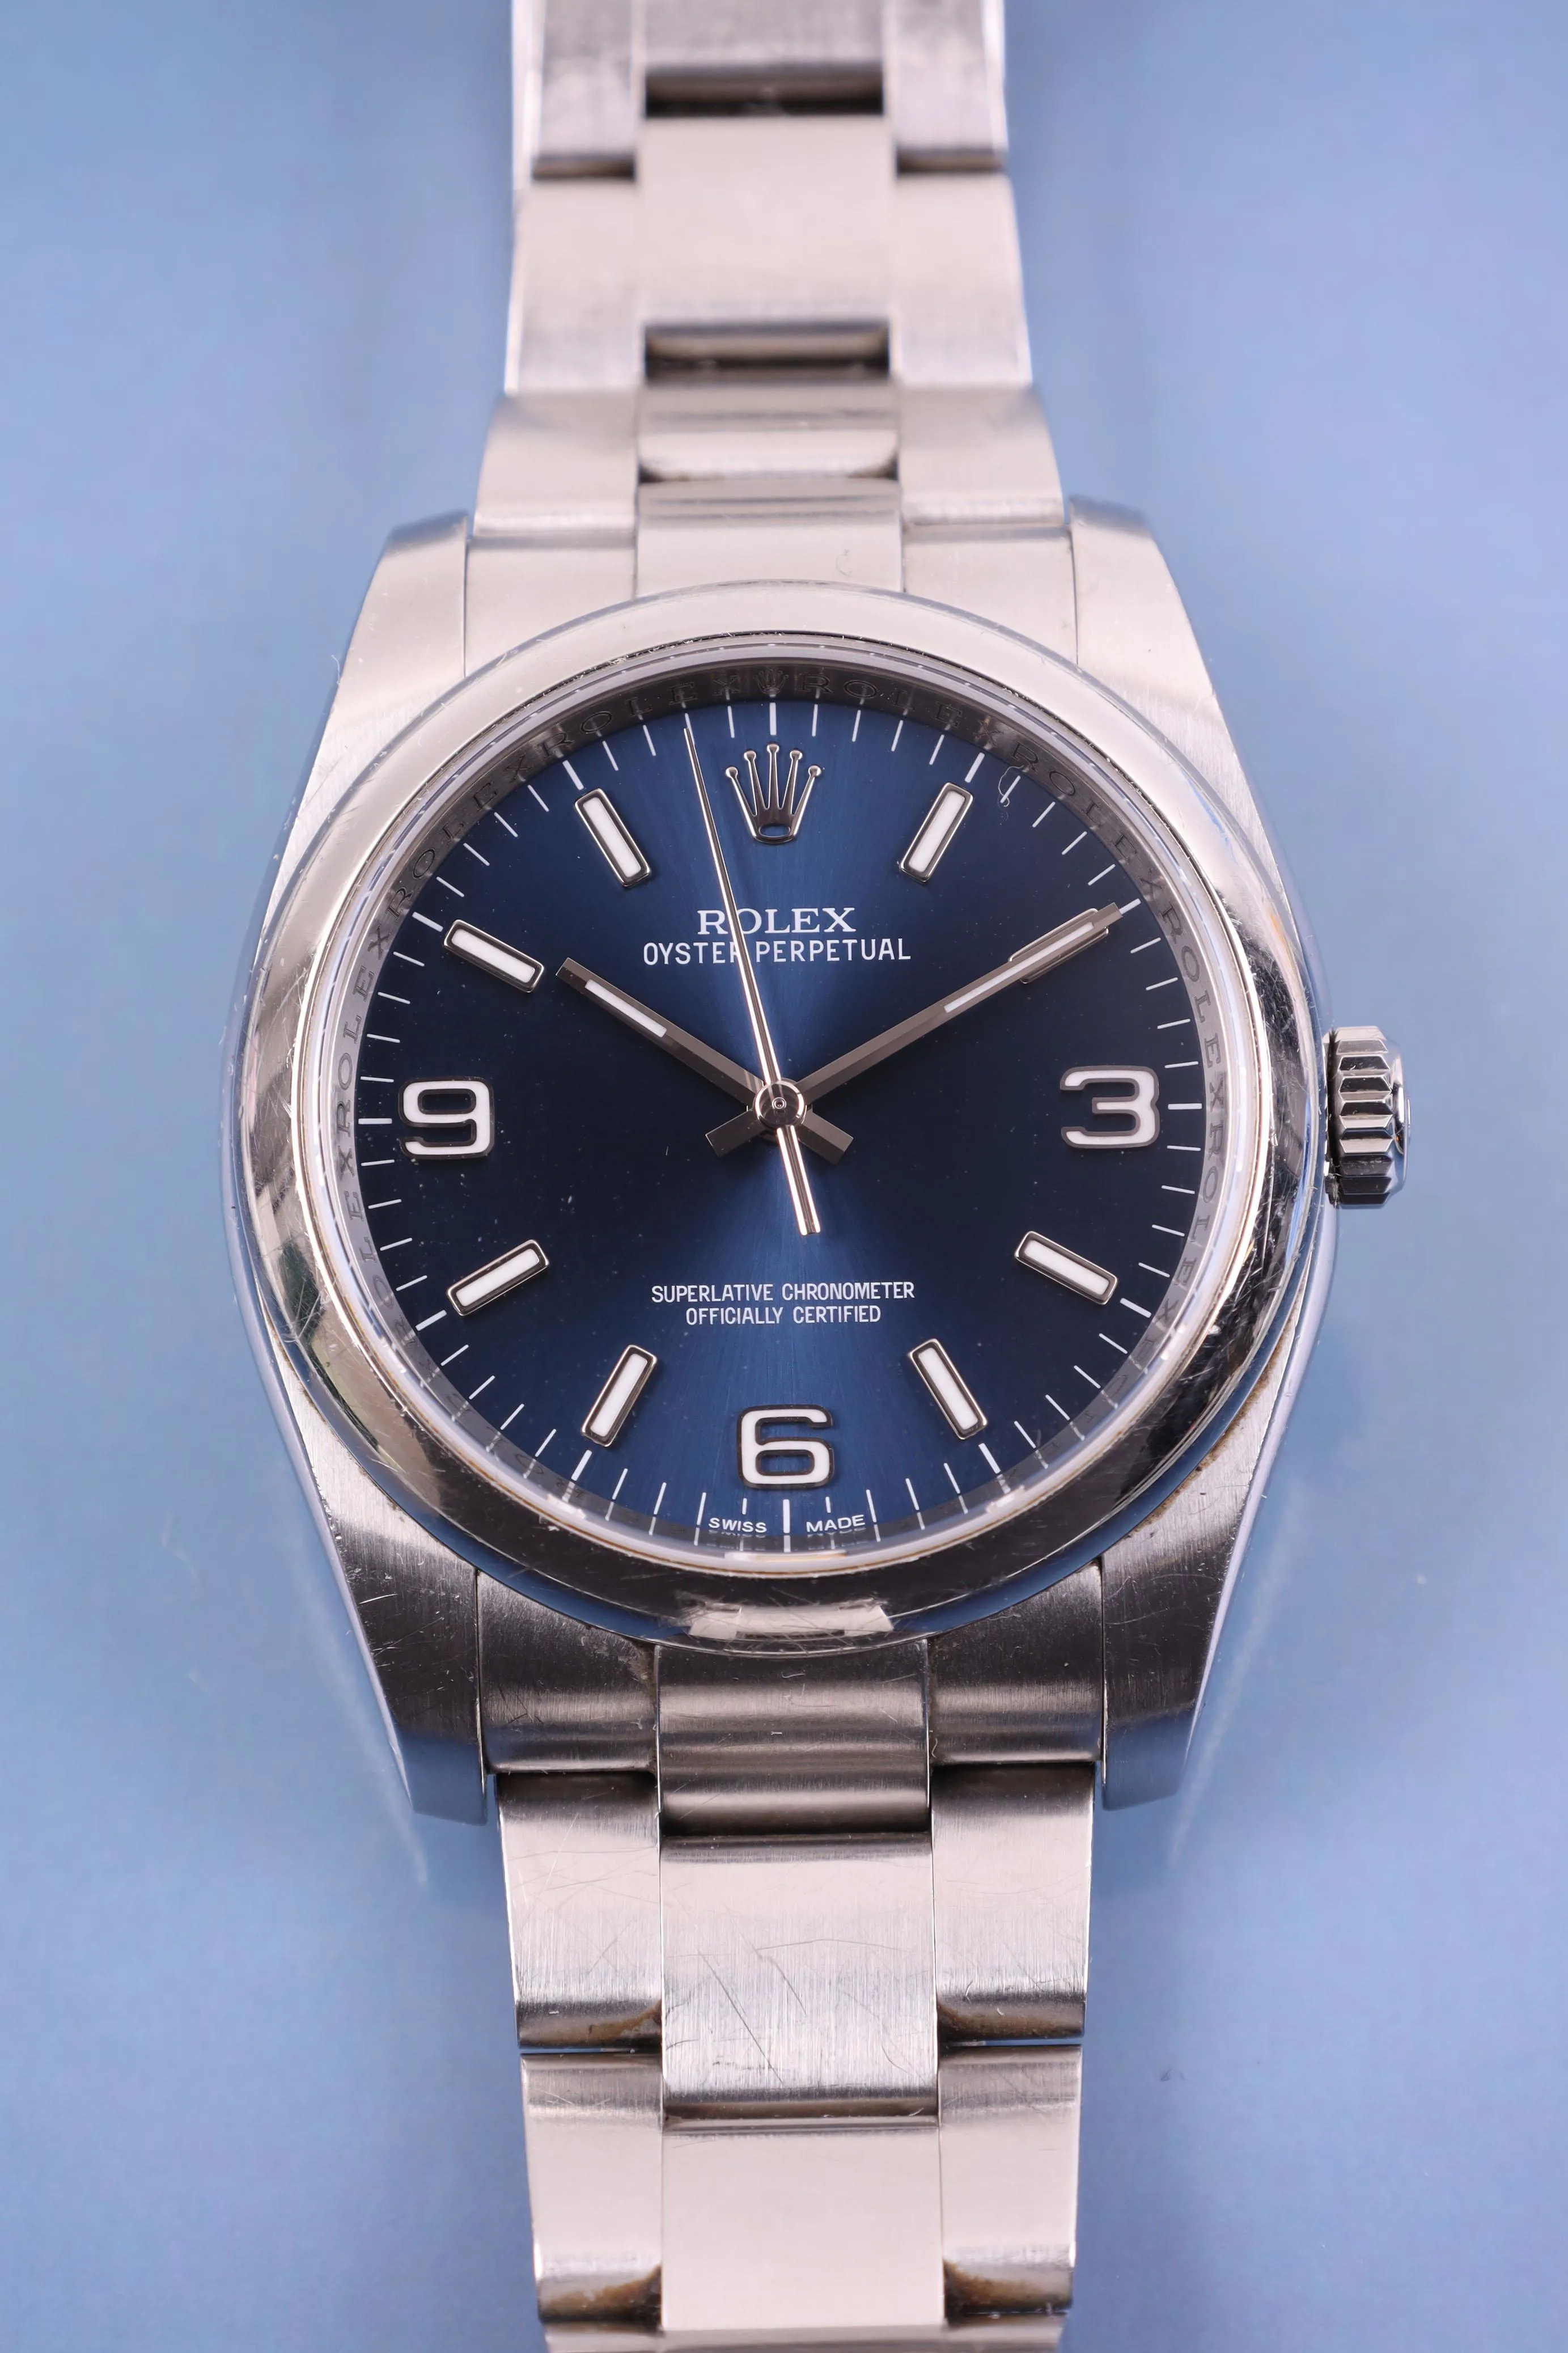 Rolex Oyster Perpetual 11600 nullmm